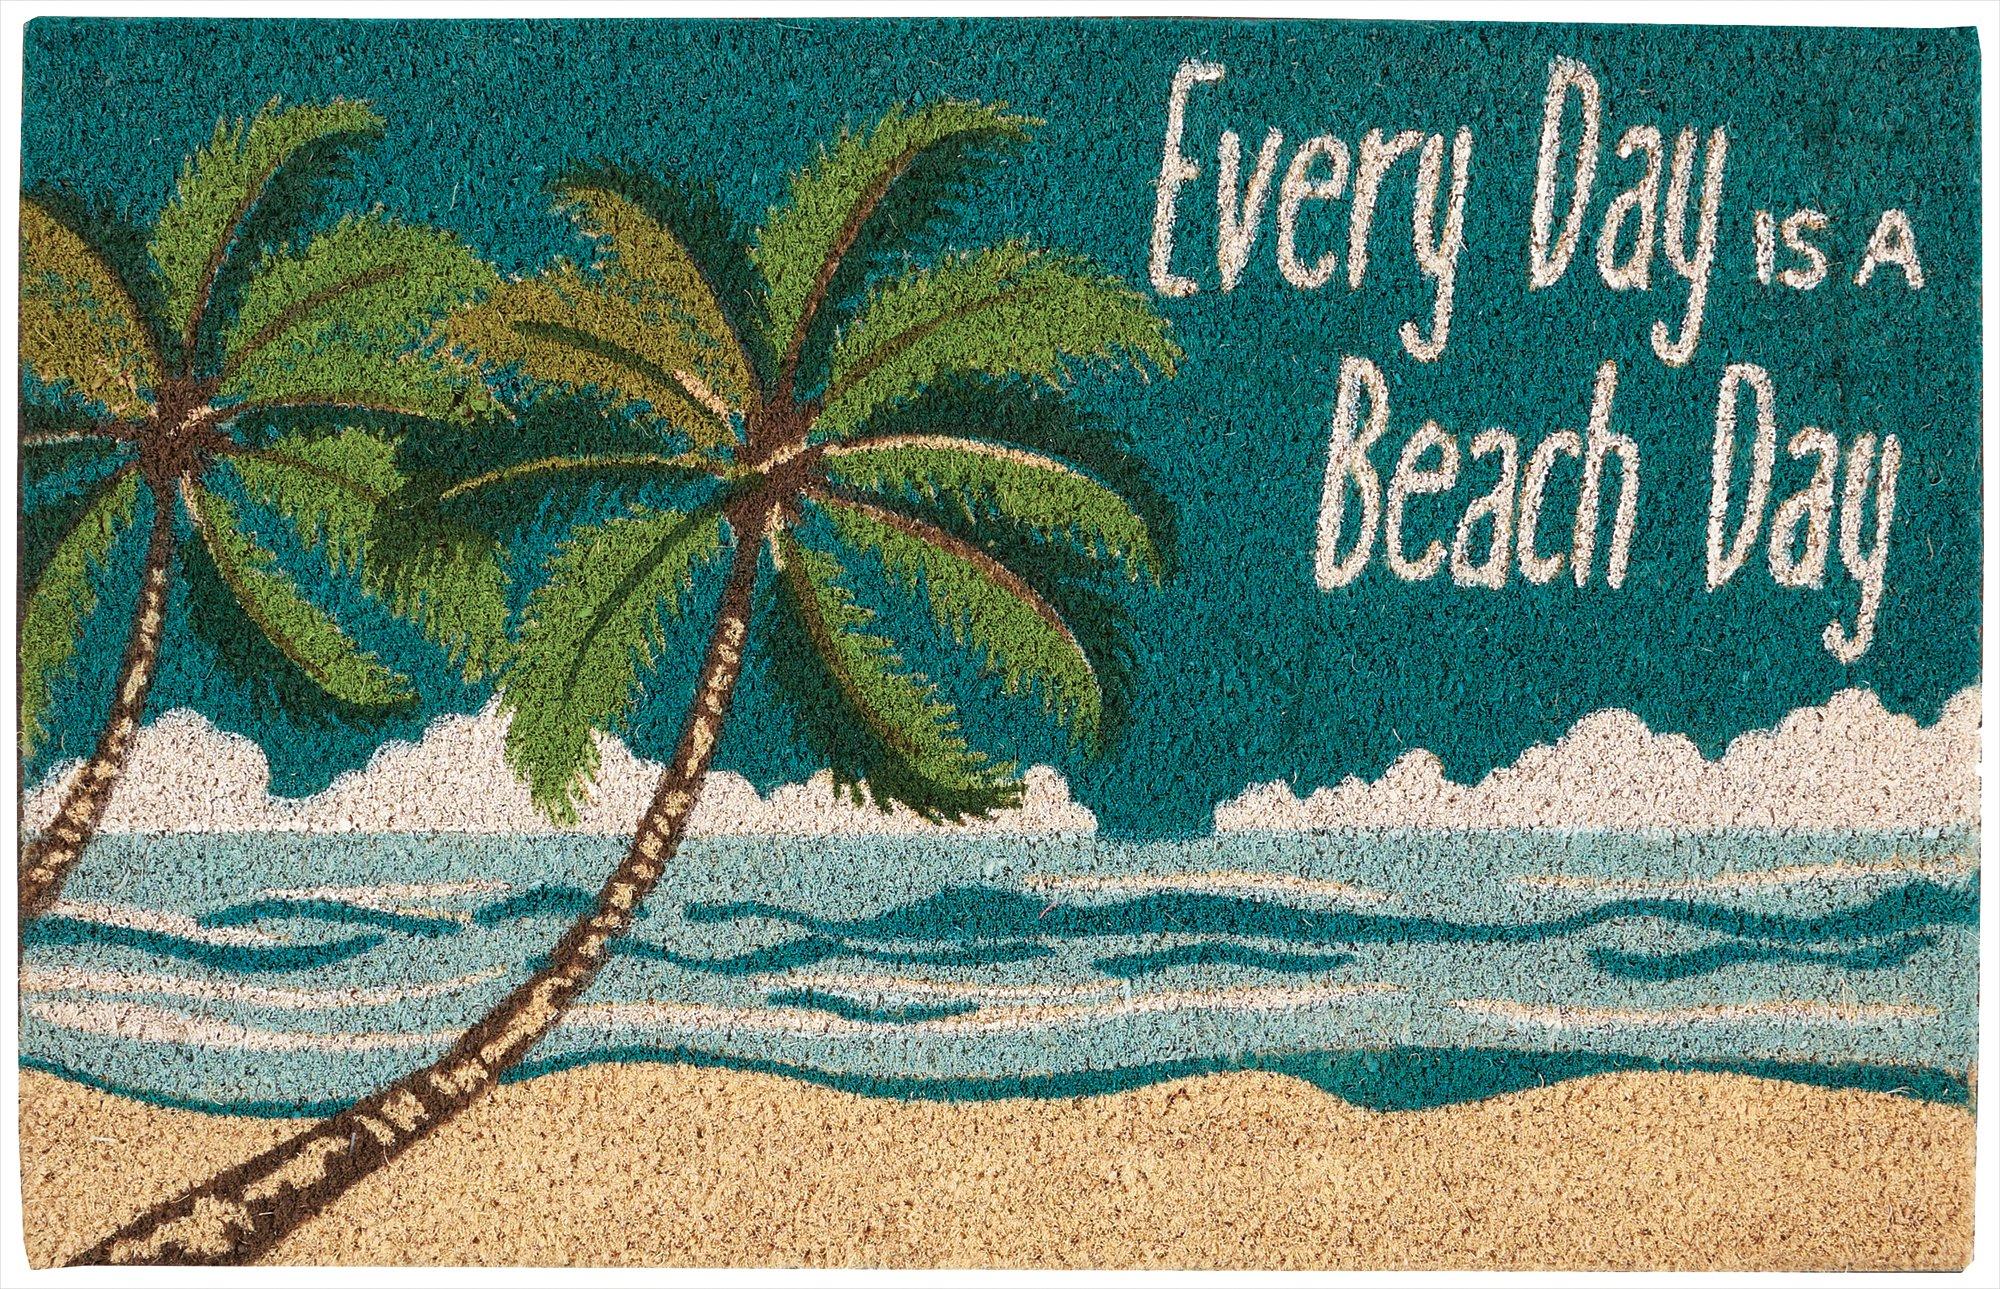 Every Day Is A Beach Day Coir Doormat